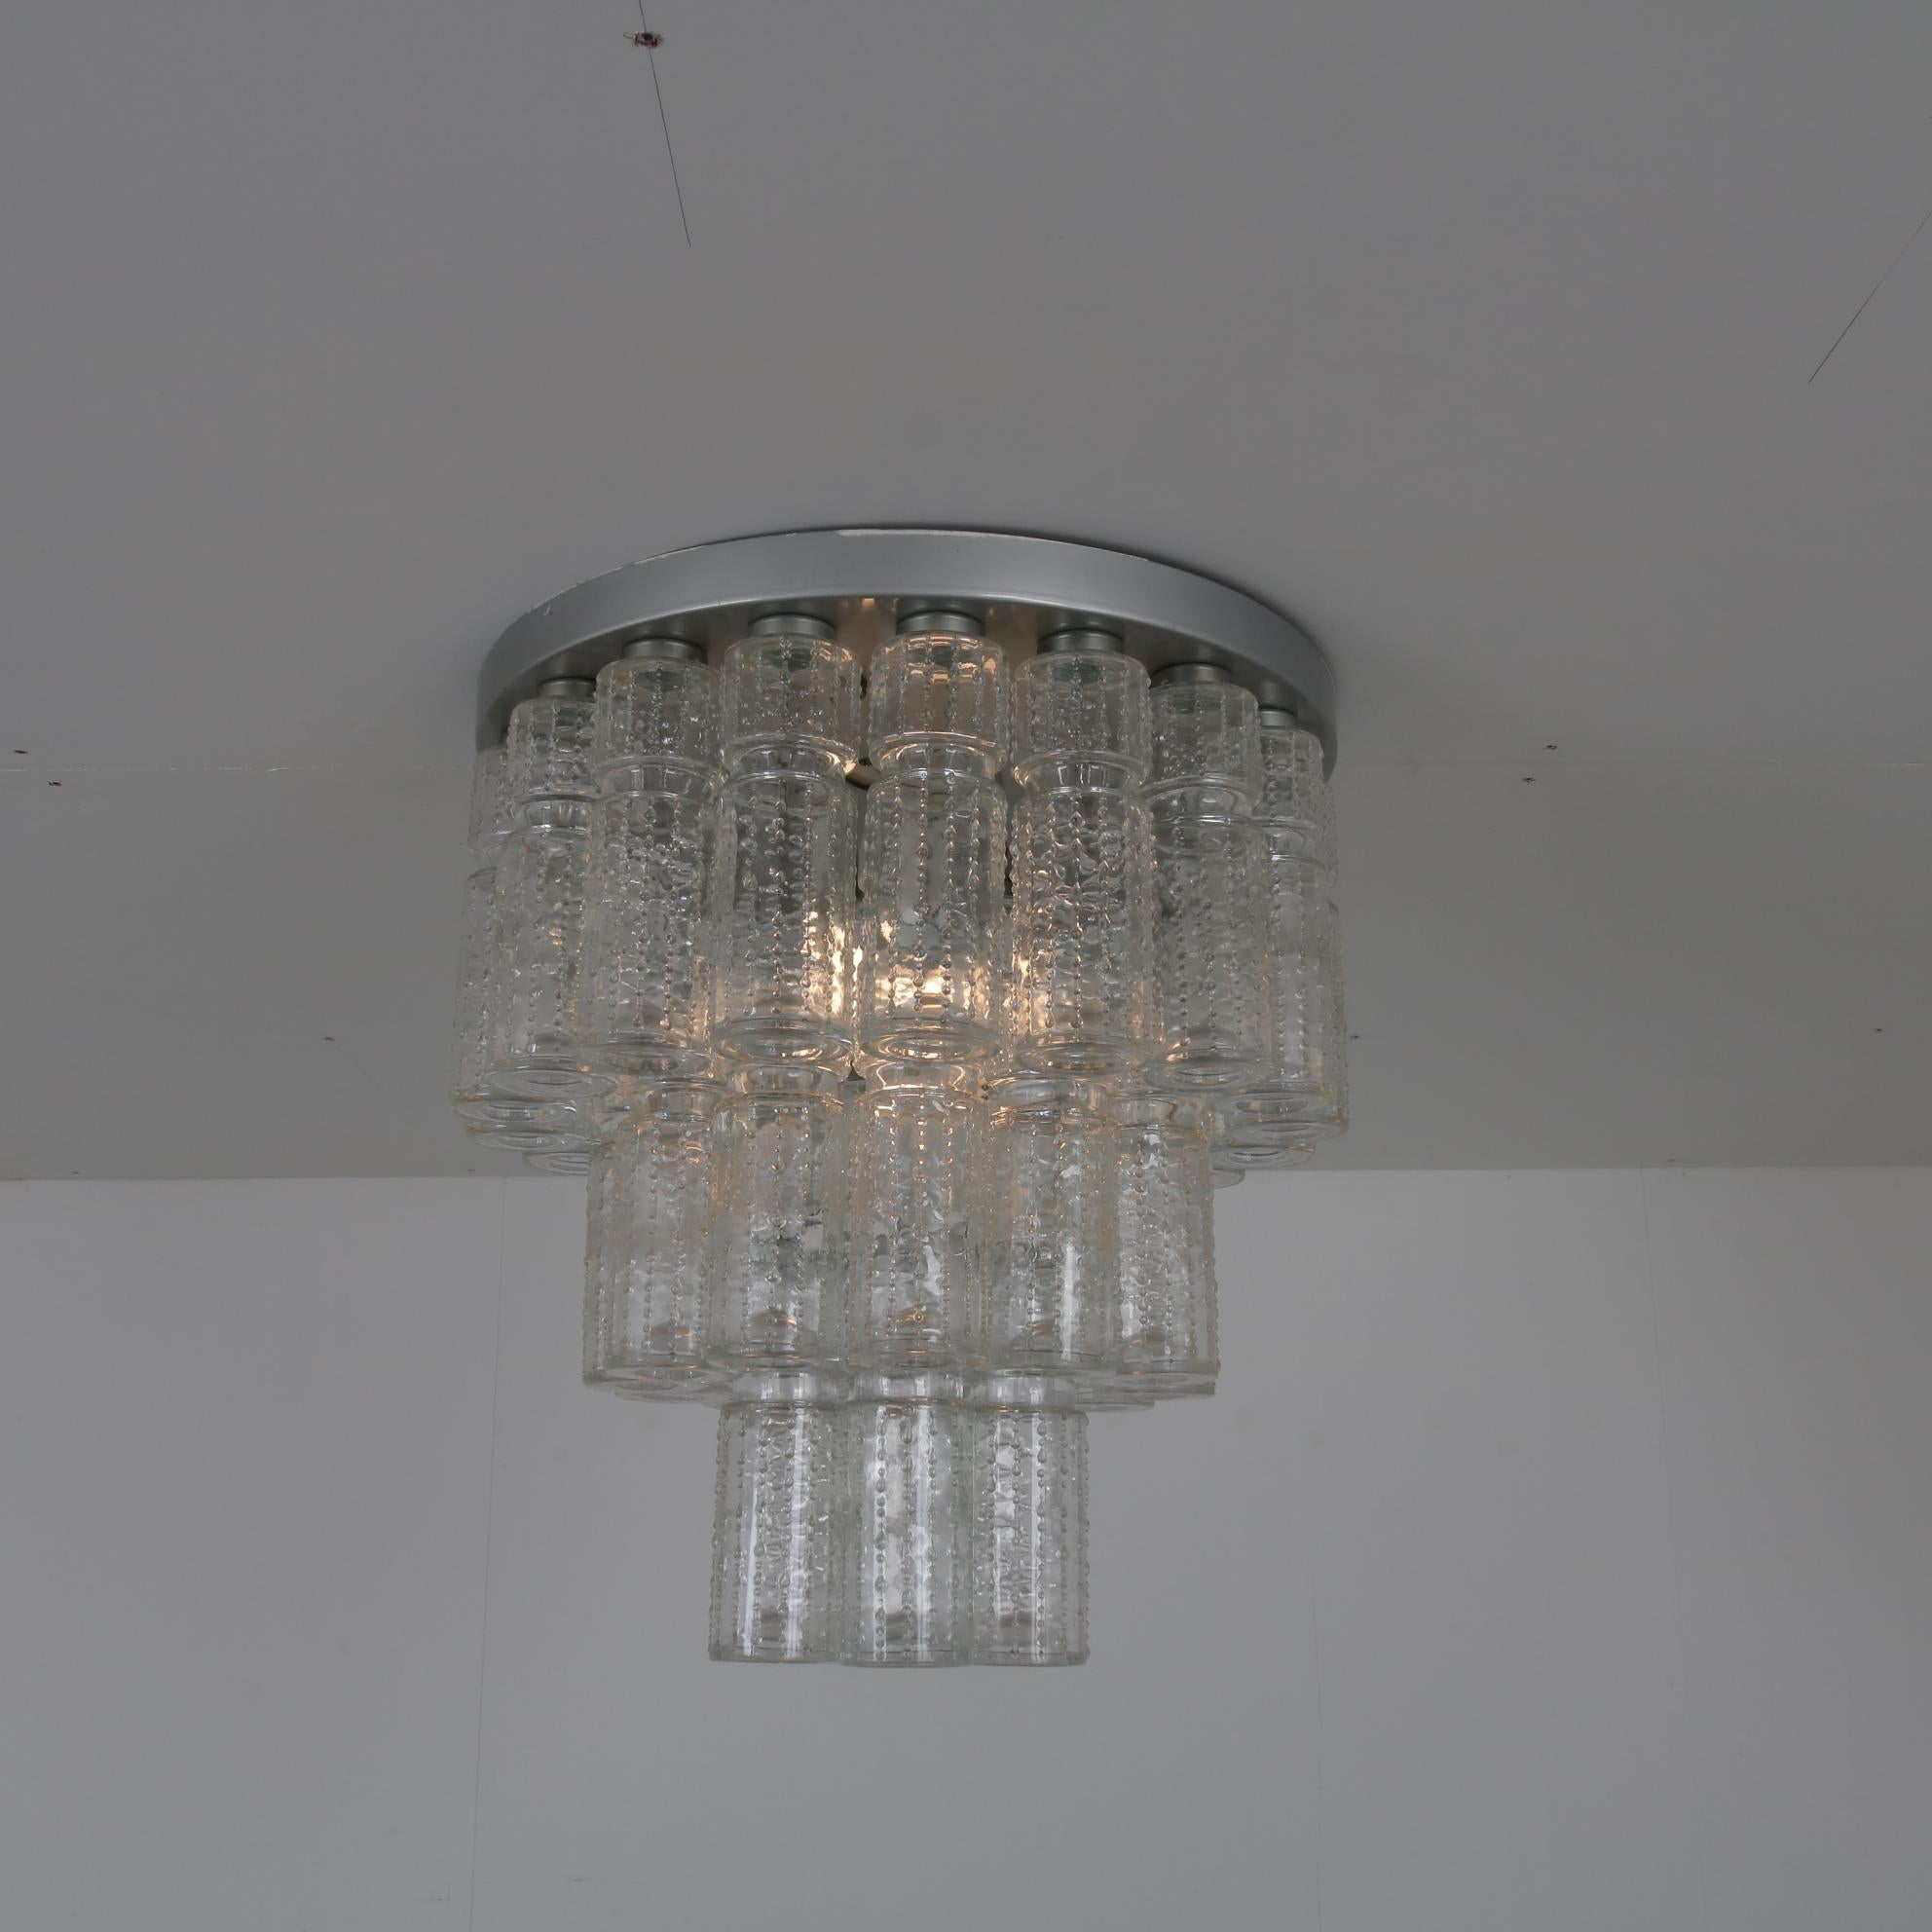 Mid-Century Modern “Lightfall” Ceiling Lamp by RAAK in the Netherlands, 1960s For Sale